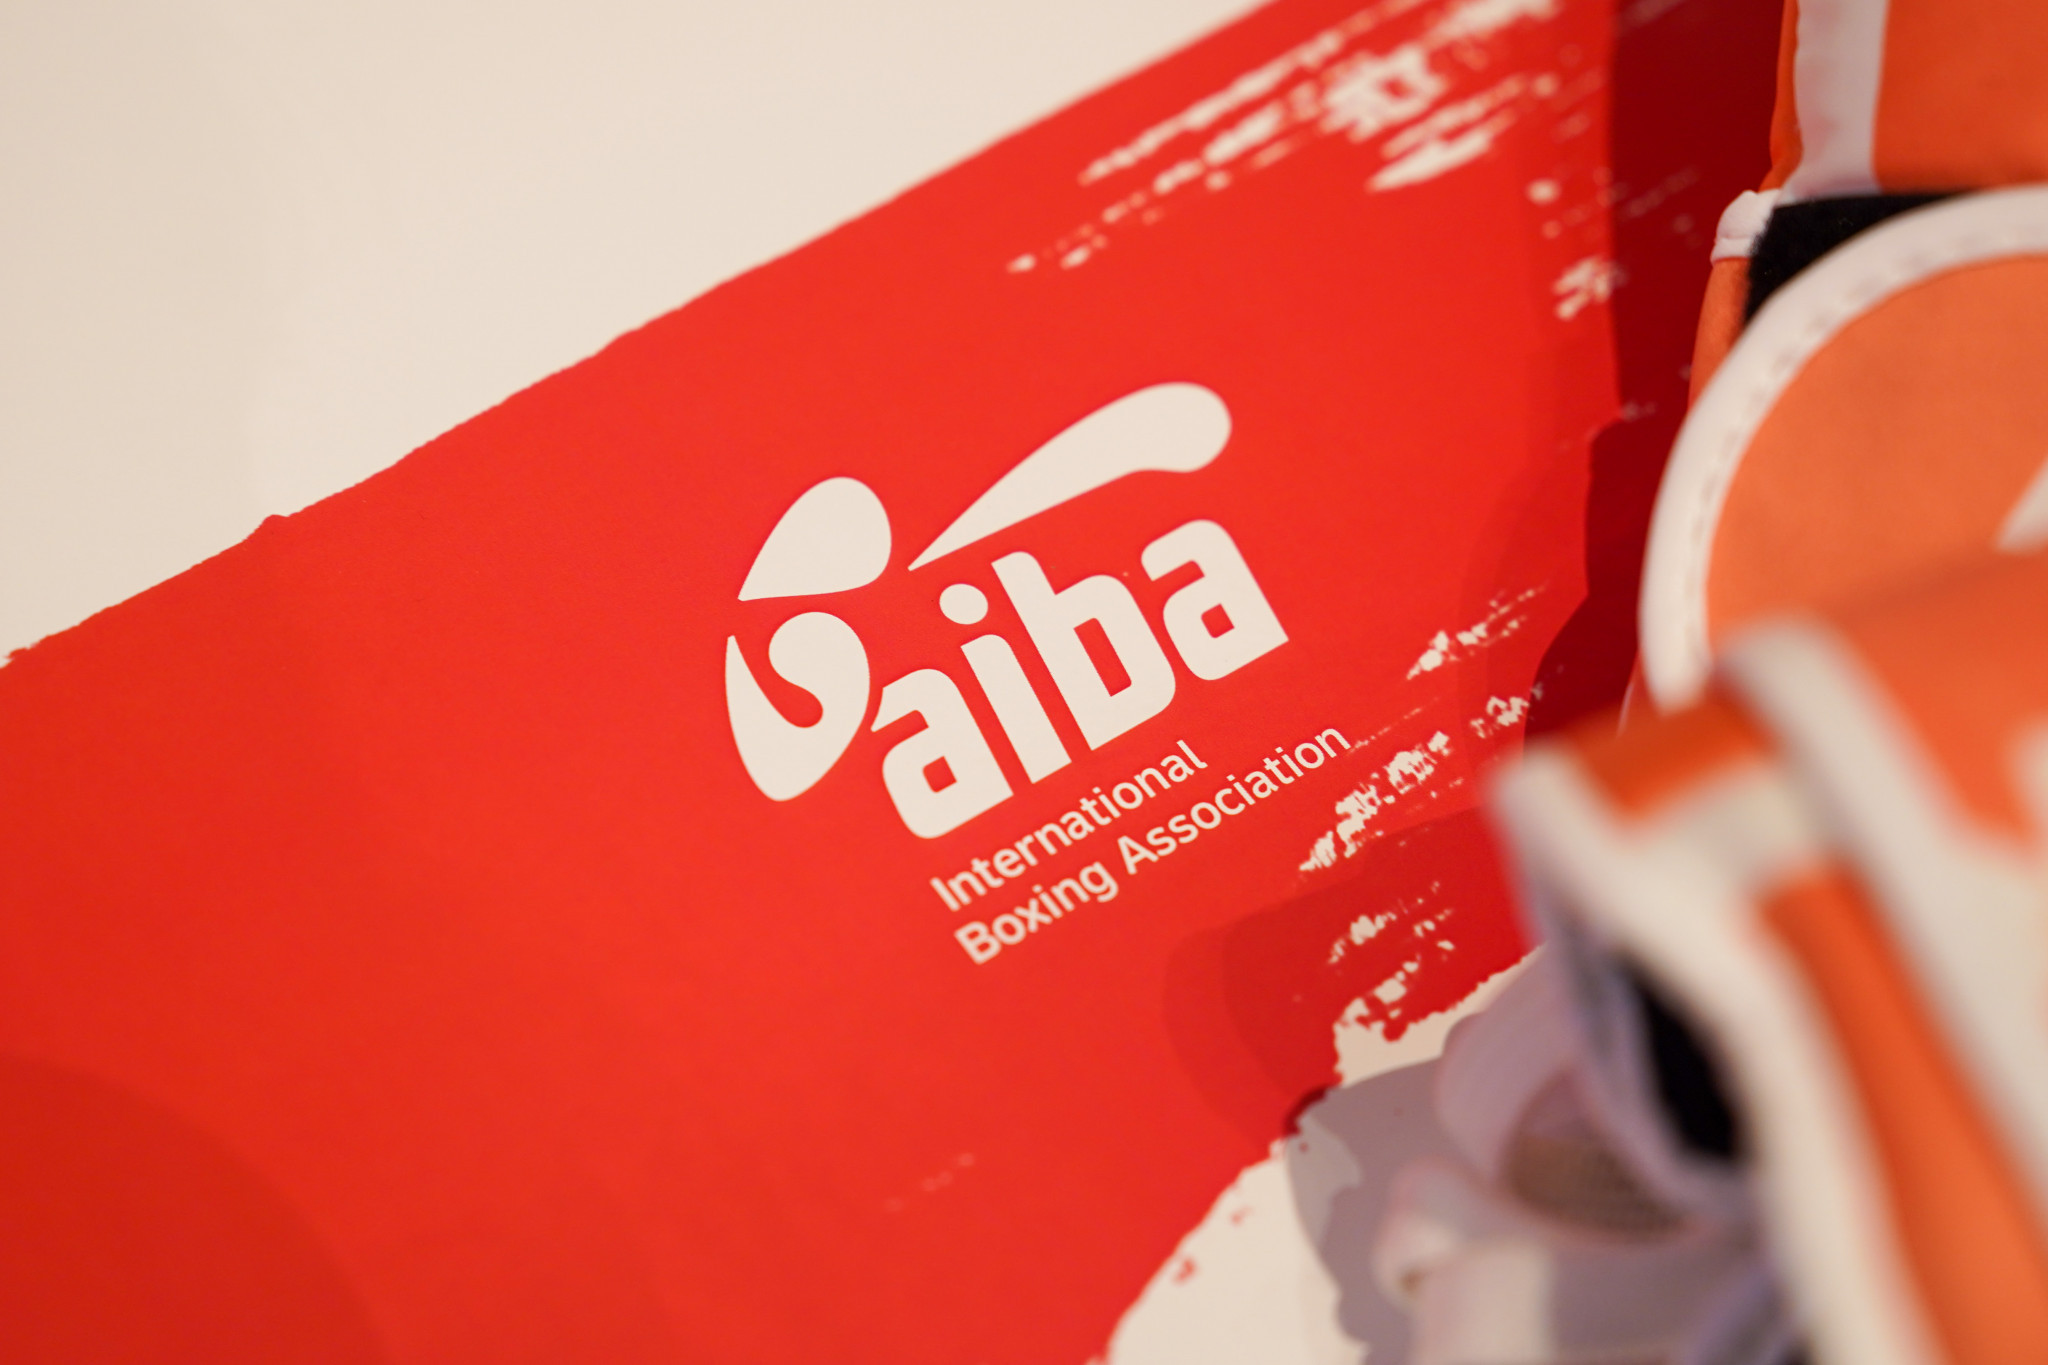 AIBA are hoping to reform the organisation and move on from a troubled past ©AIBA